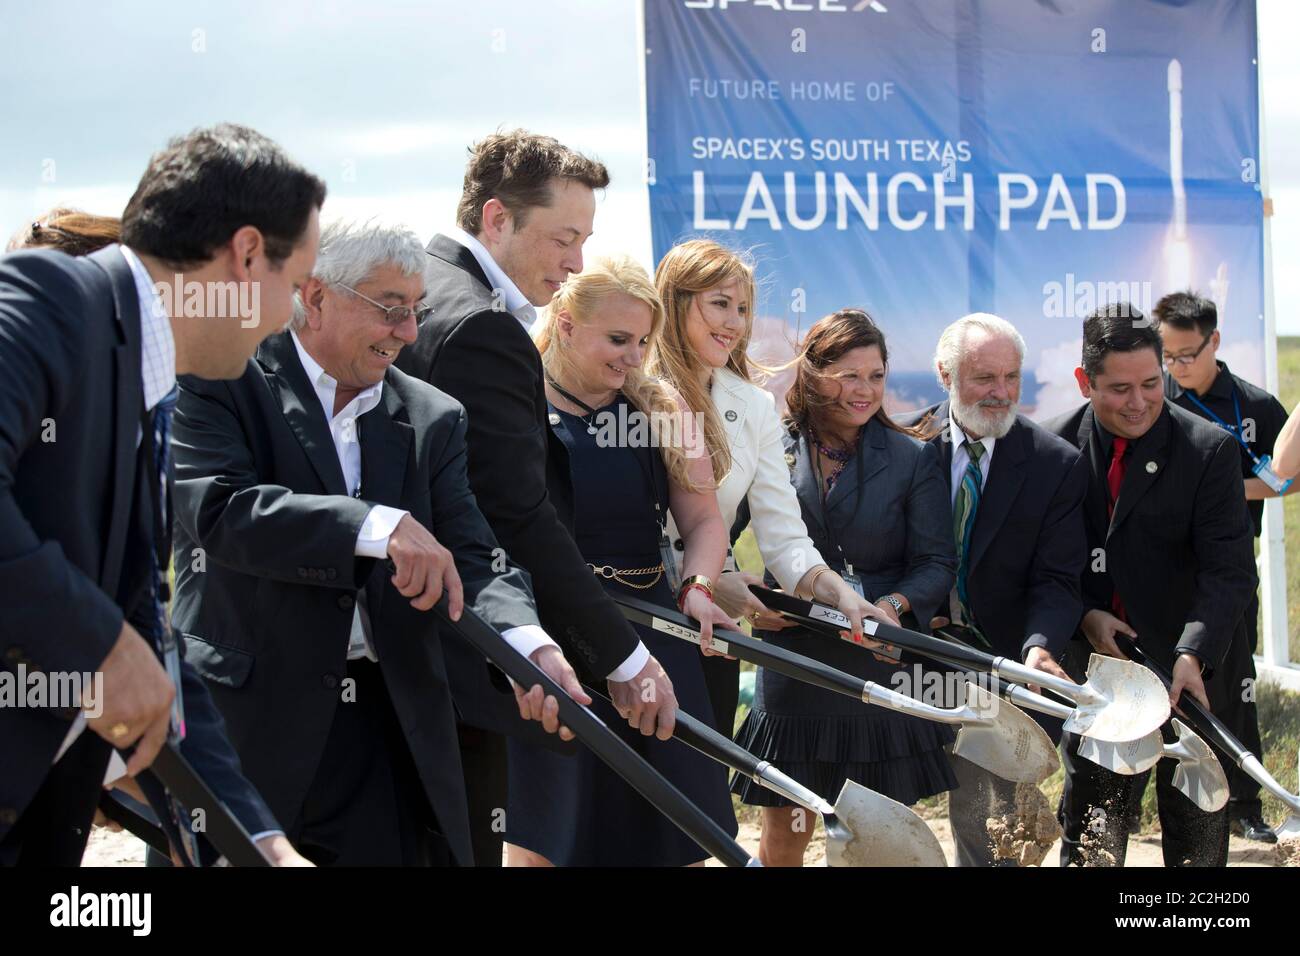 Boca Chica Texas USA, September 23, 2014:SpaceX CEO Elon Musk (third from left) helps break ground on the site of the company's new space port in far south Texas. SpaceX COO Gwynne Shotwell is fifth from left. The remote location east of Brownsville, Texas, is two miles from the mouth of the Rio Grande River and Texas' border with Mexico.  ©Bob Daemmrich Stock Photo